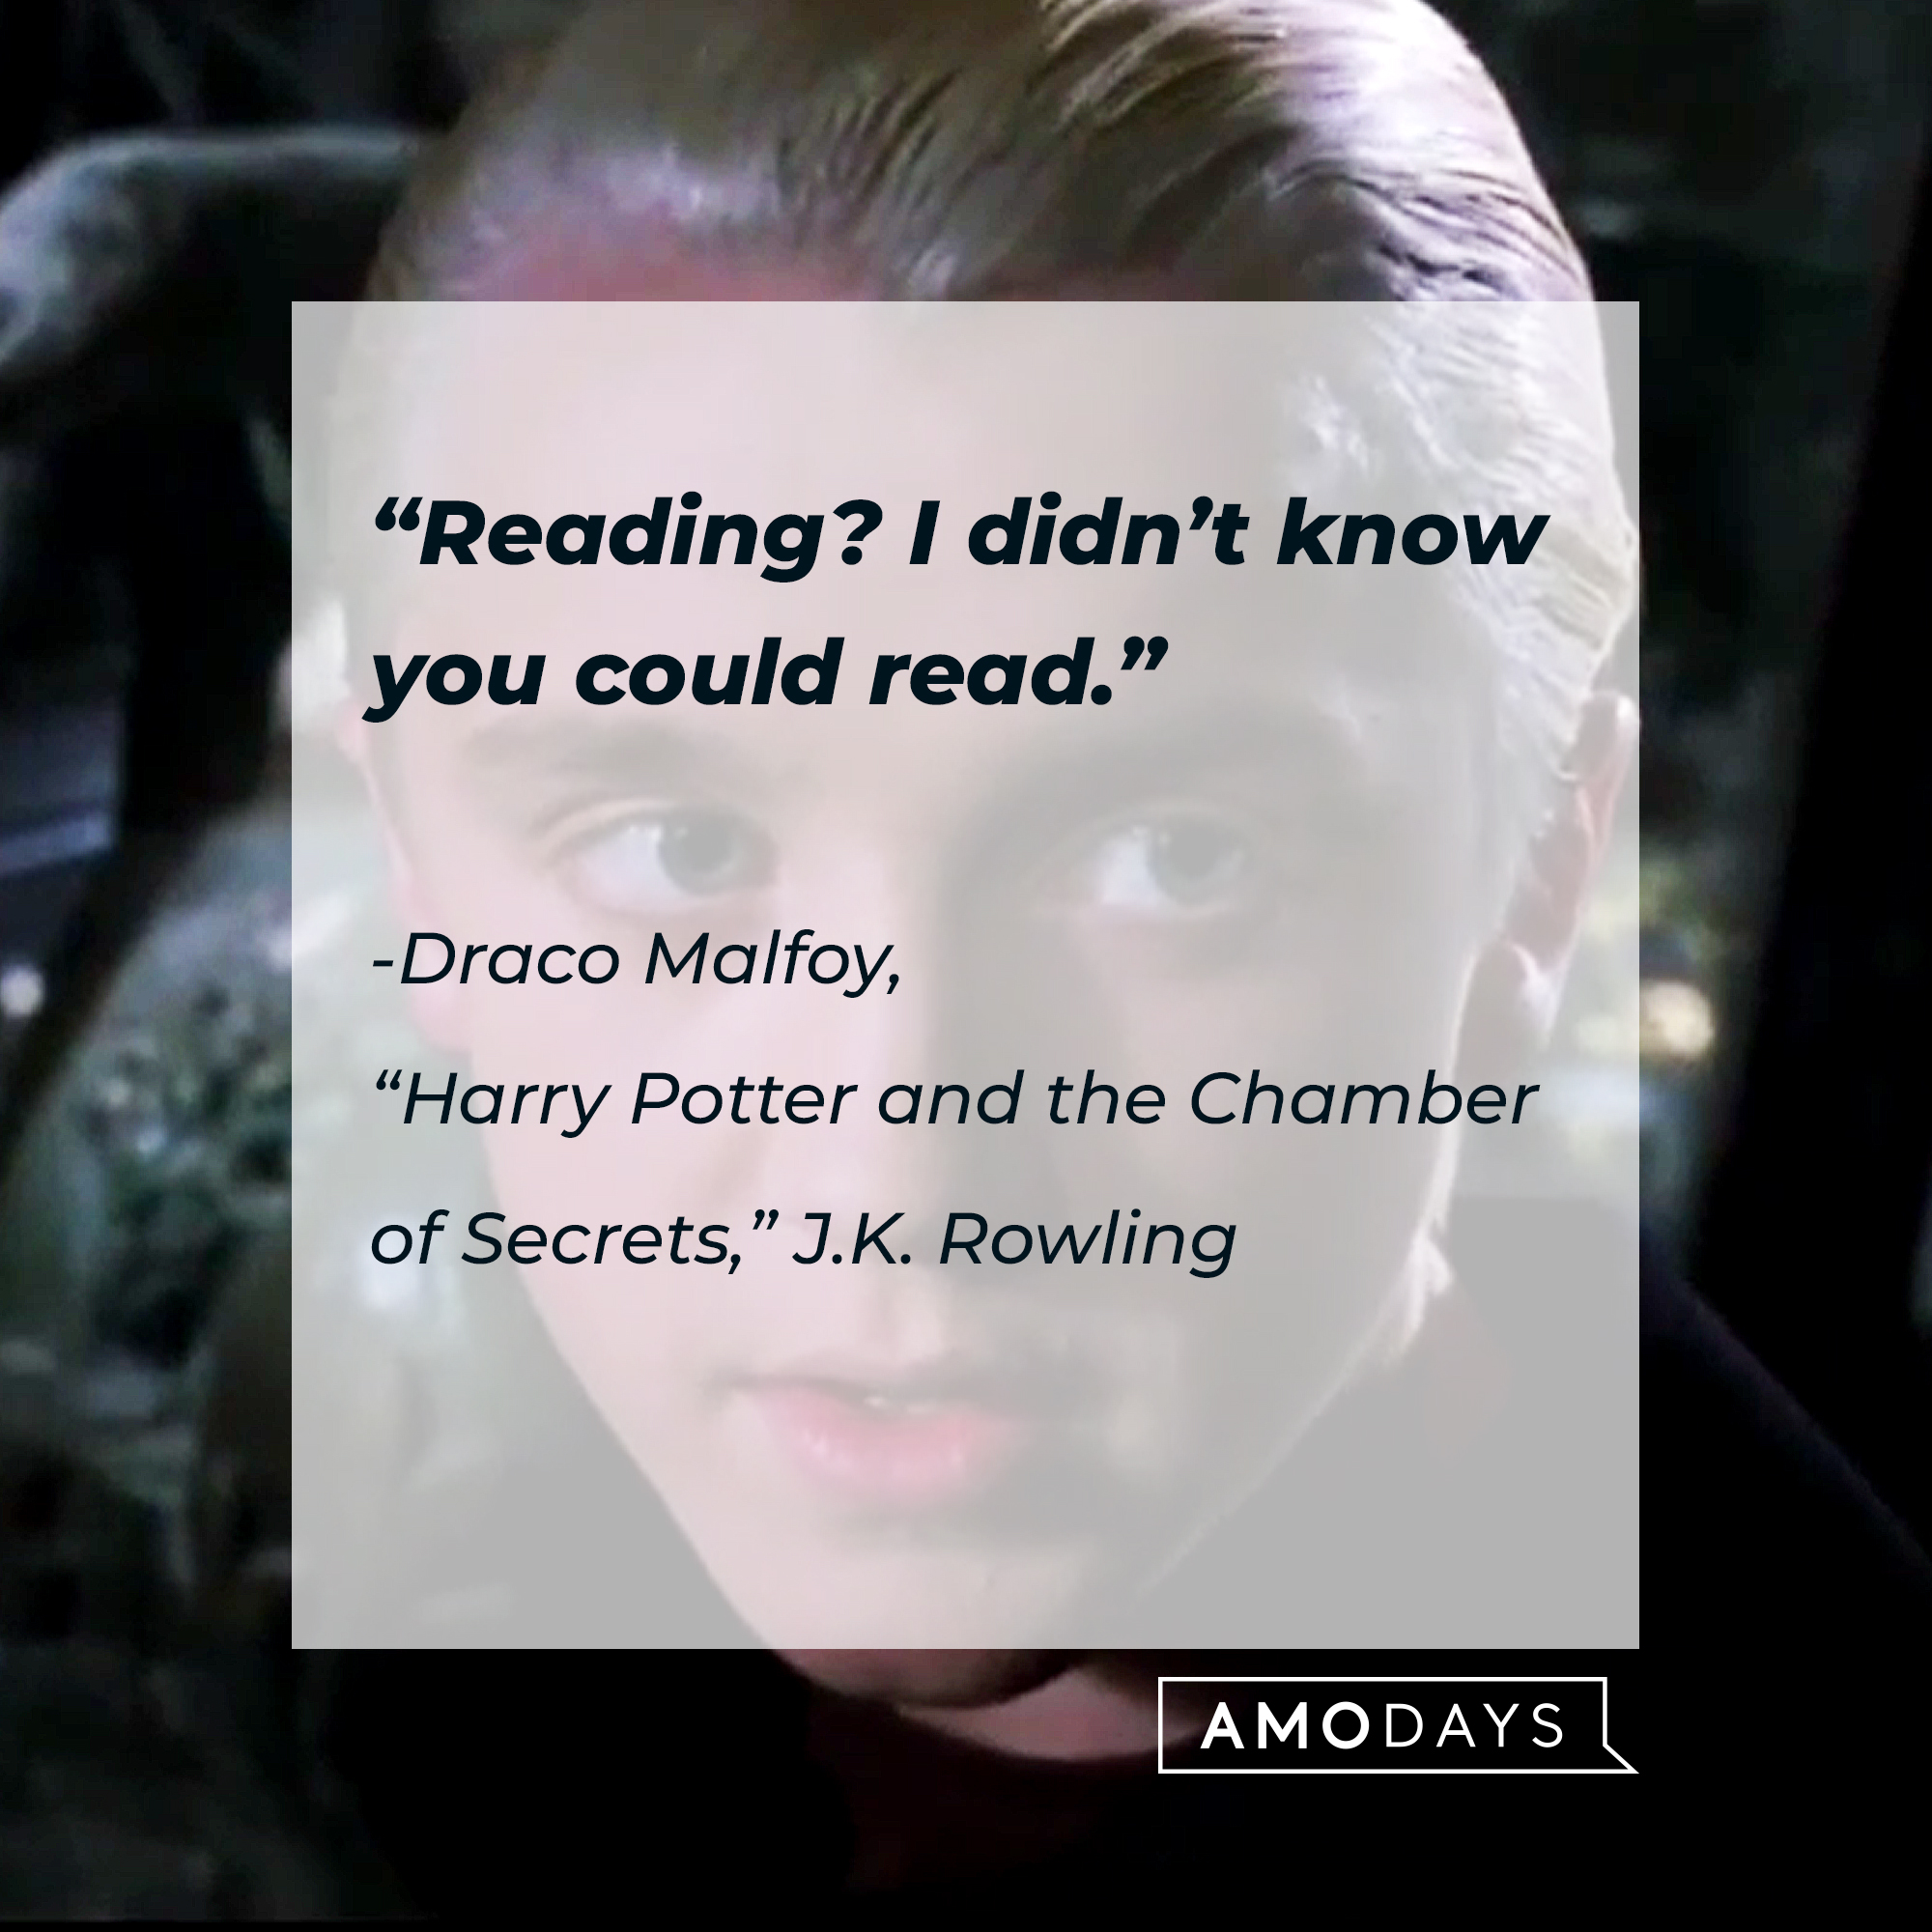 An image of Draco Malfoy with his quote: "Reading? I didn’t know you could read." | Source: Youtube.com/harrypotter